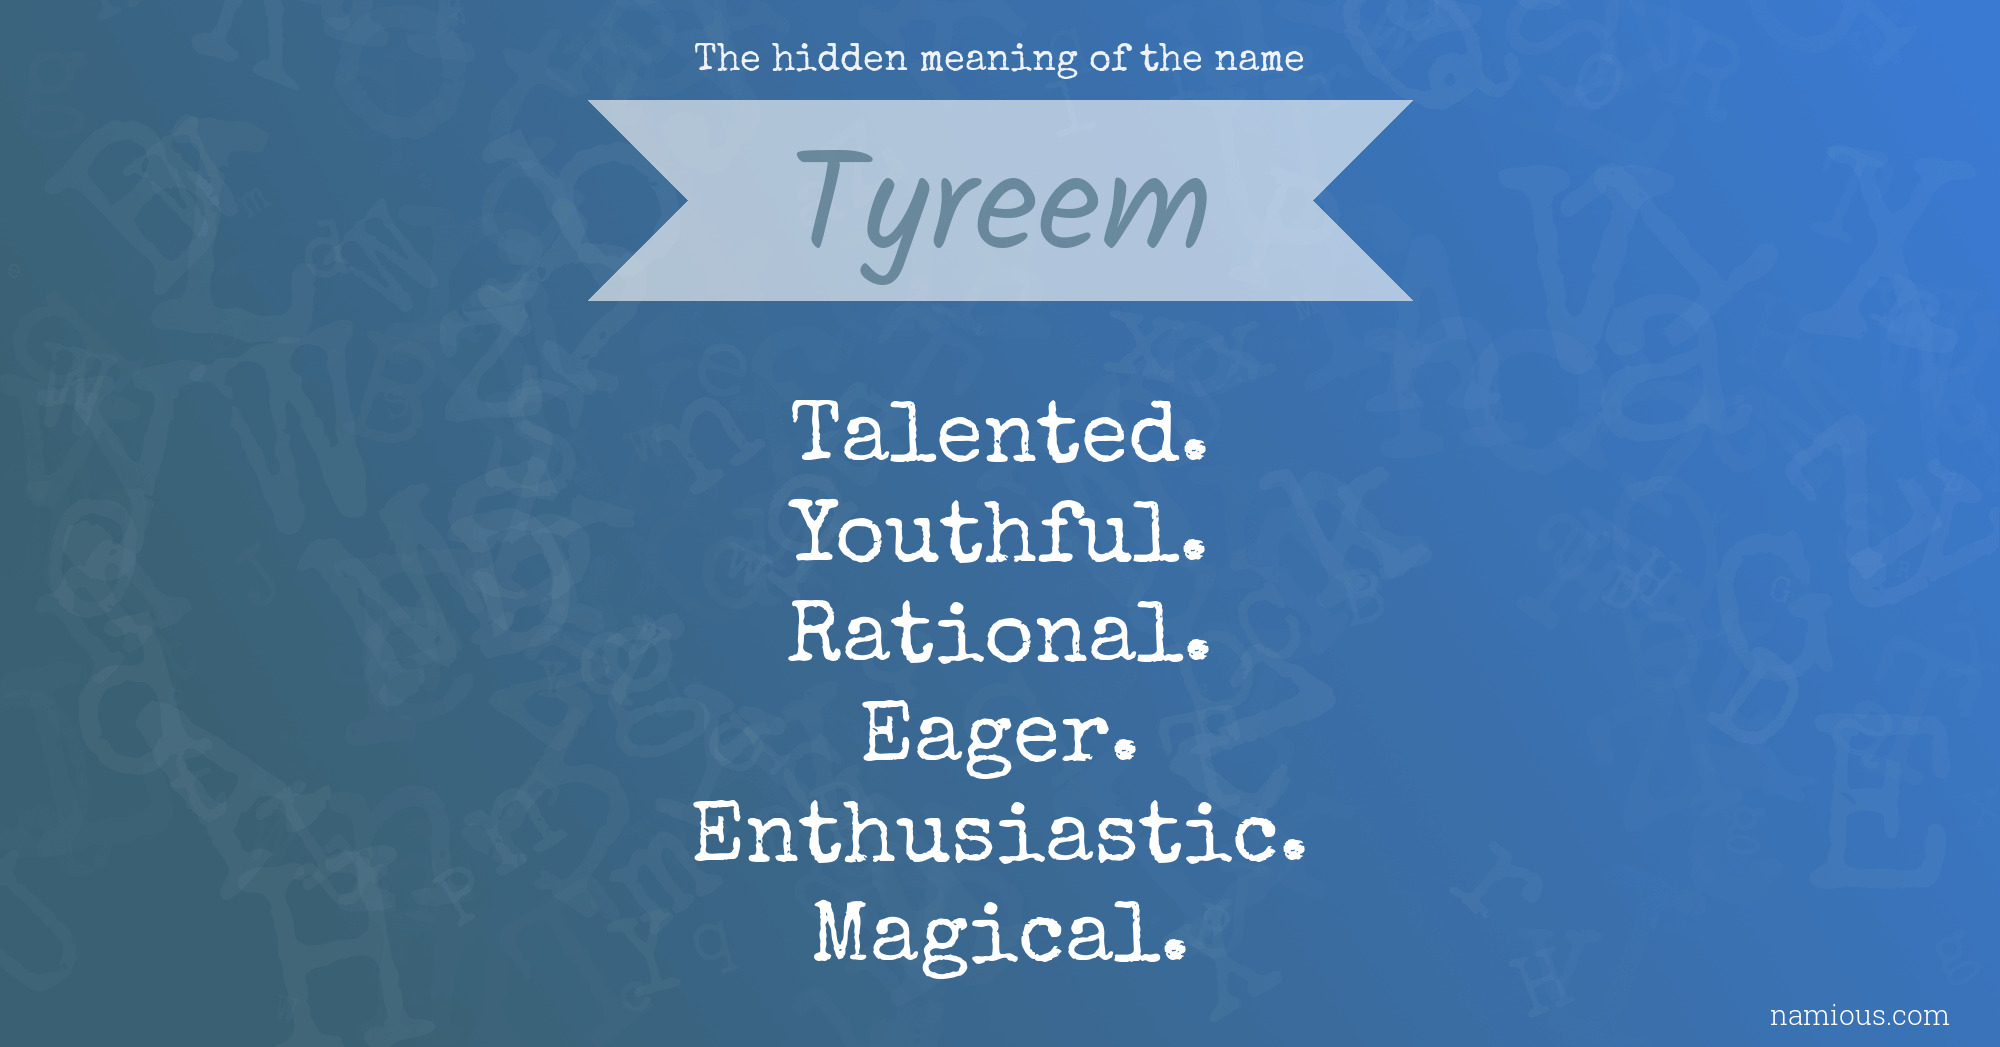 The hidden meaning of the name Tyreem